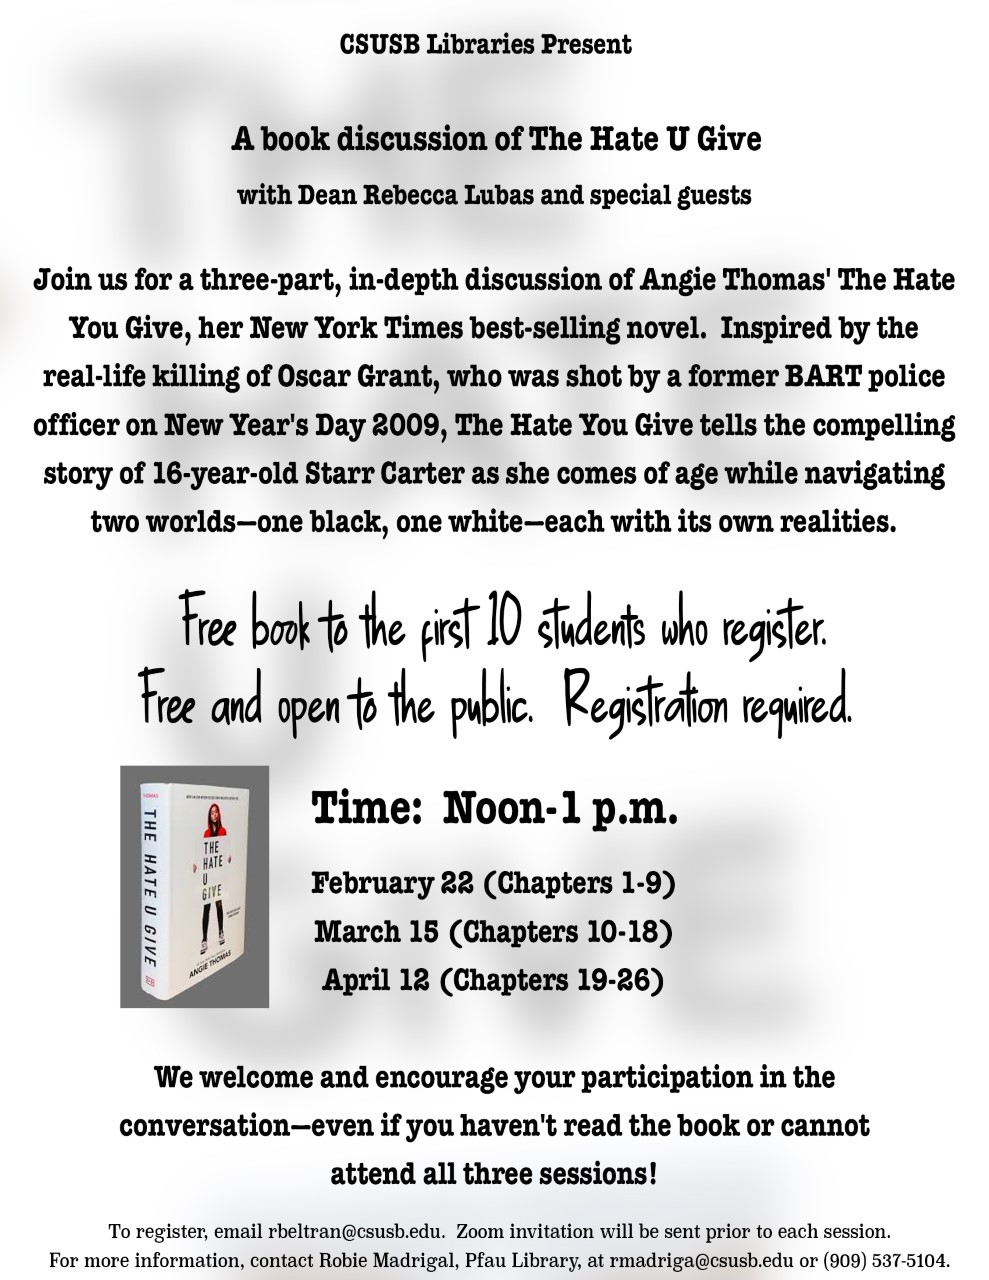 A book discussion of The Hate U Give flyer